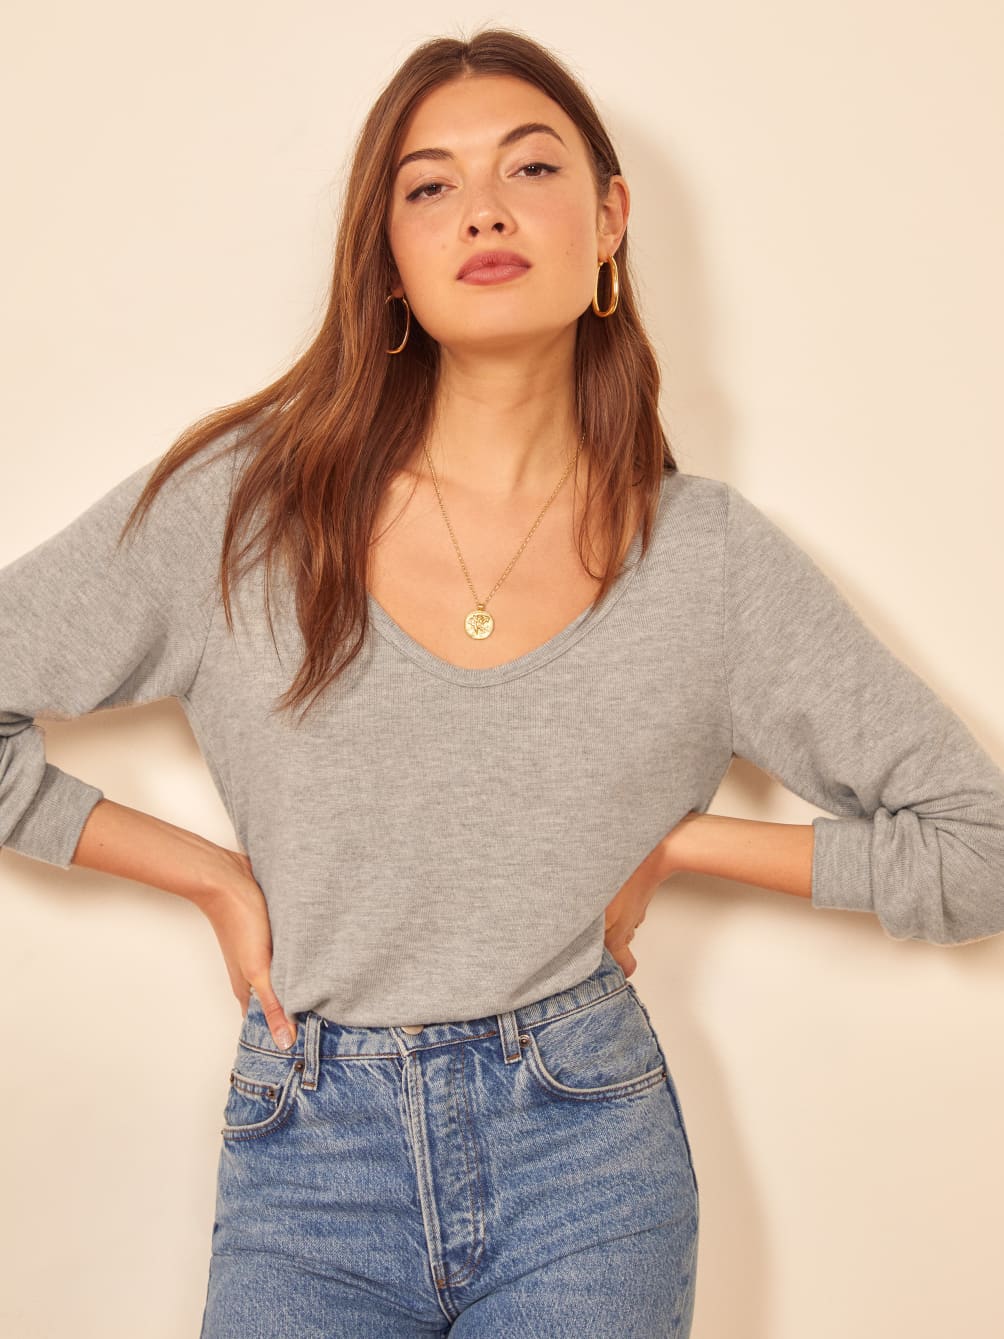 reformation marie sweater